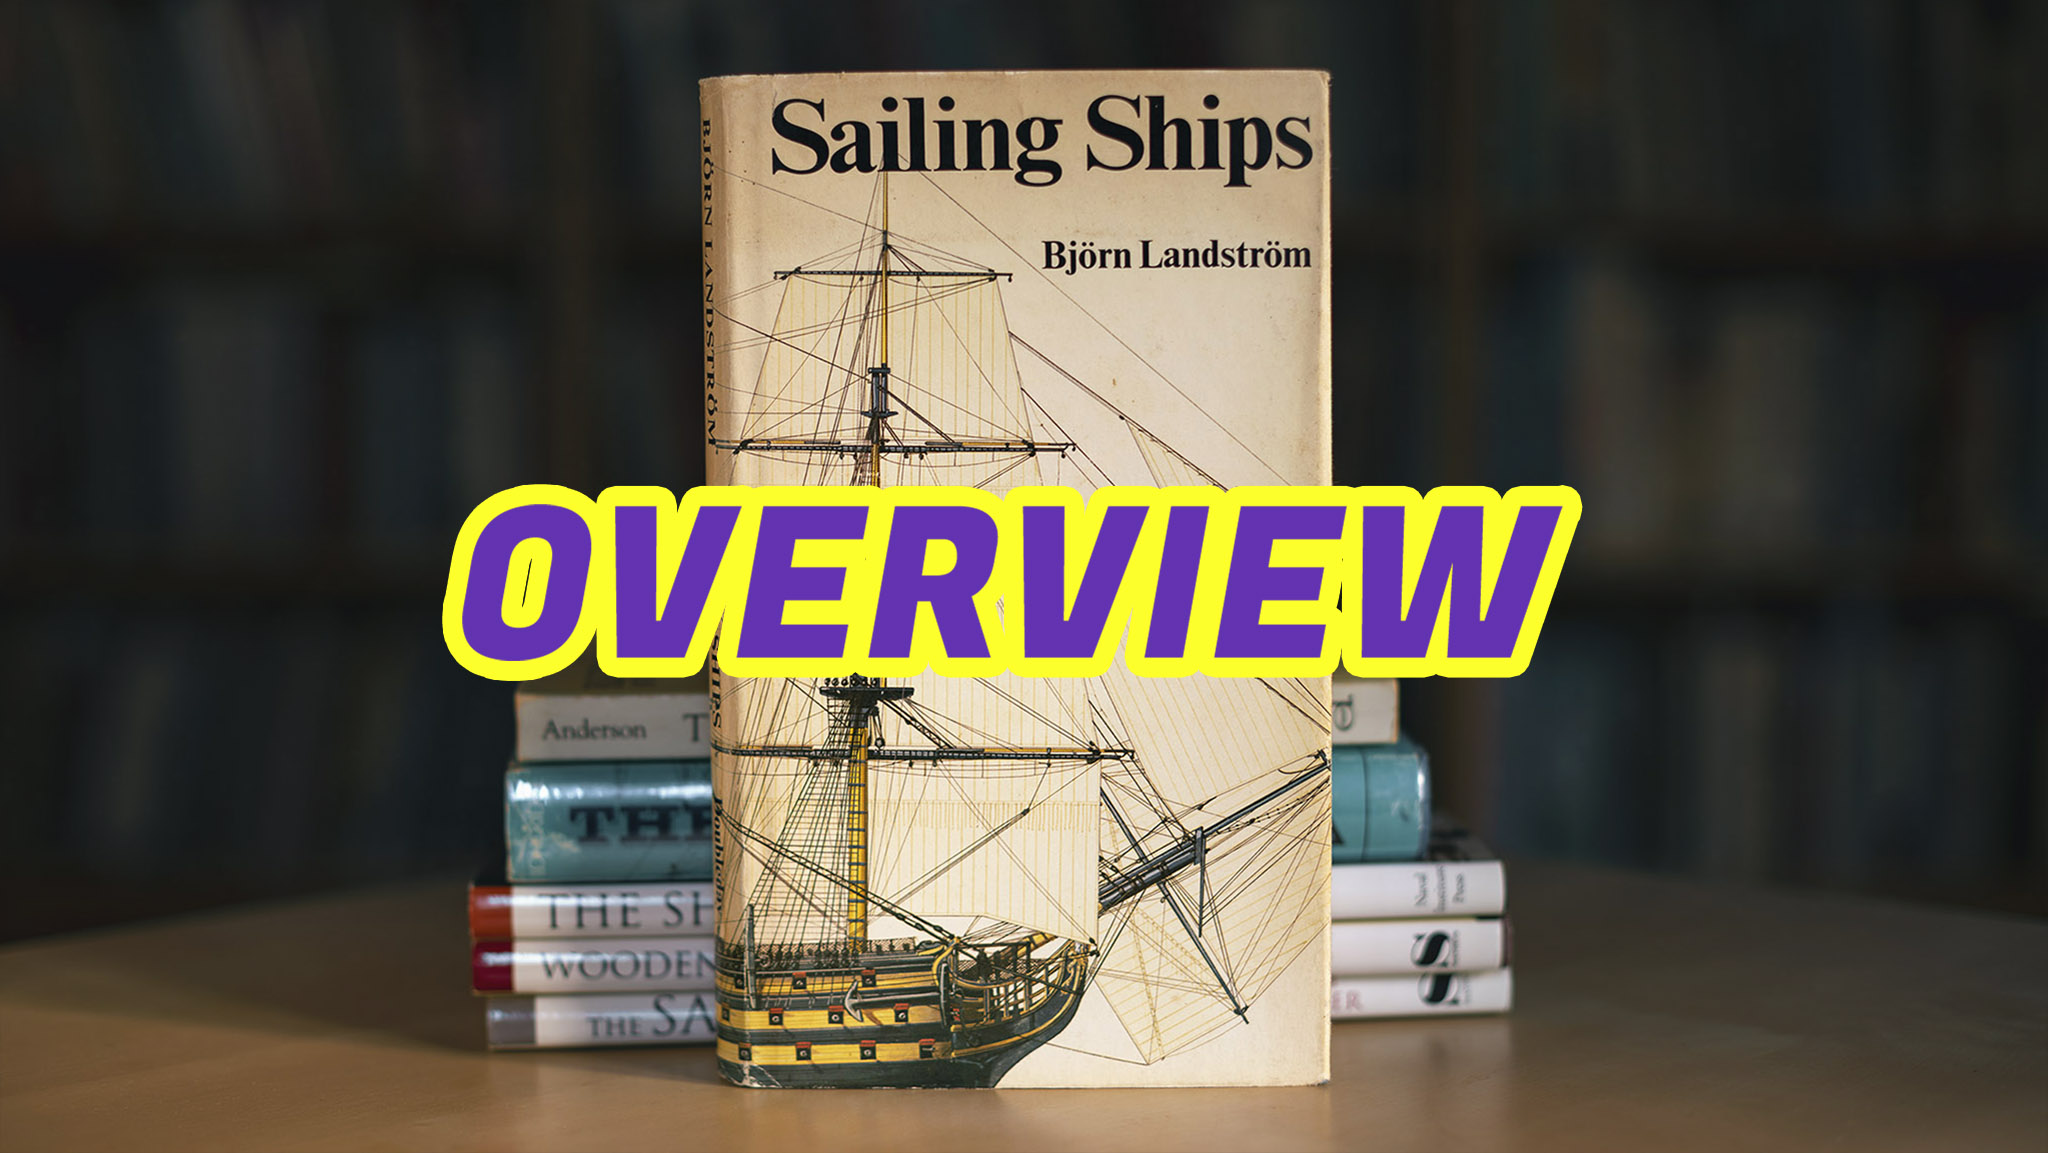 OVERVIEW-Sailing Ships copy.jpg